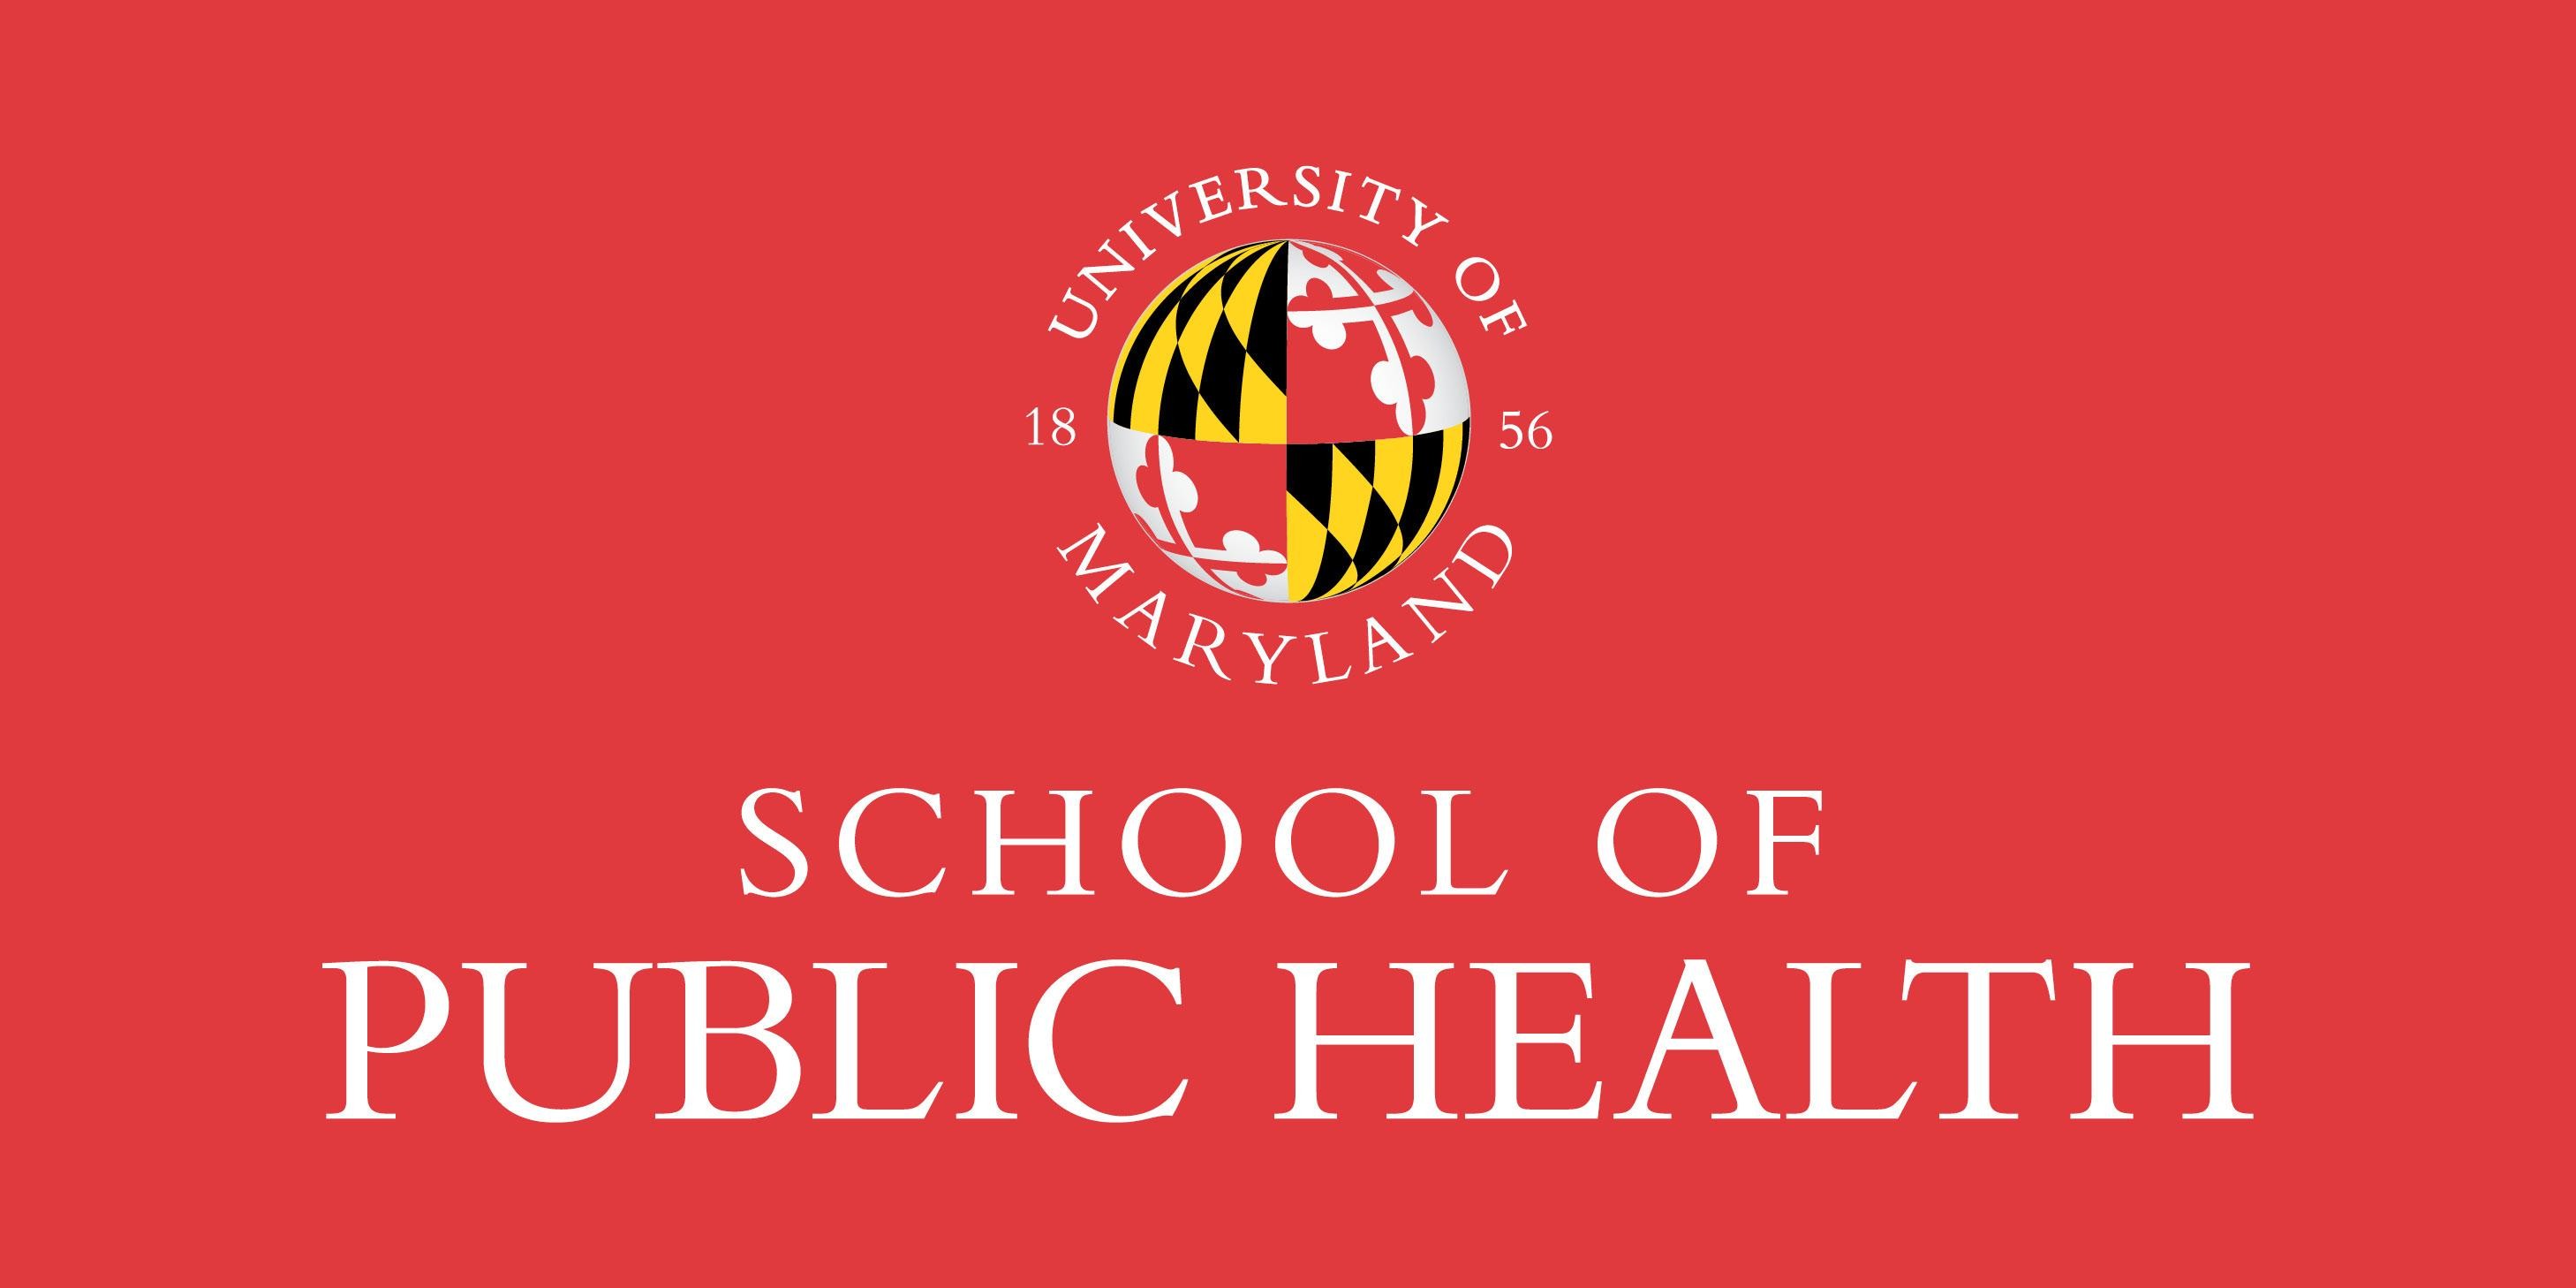 Launching Transformation: University of Maryland SPH Program Equips Students for Health Careers